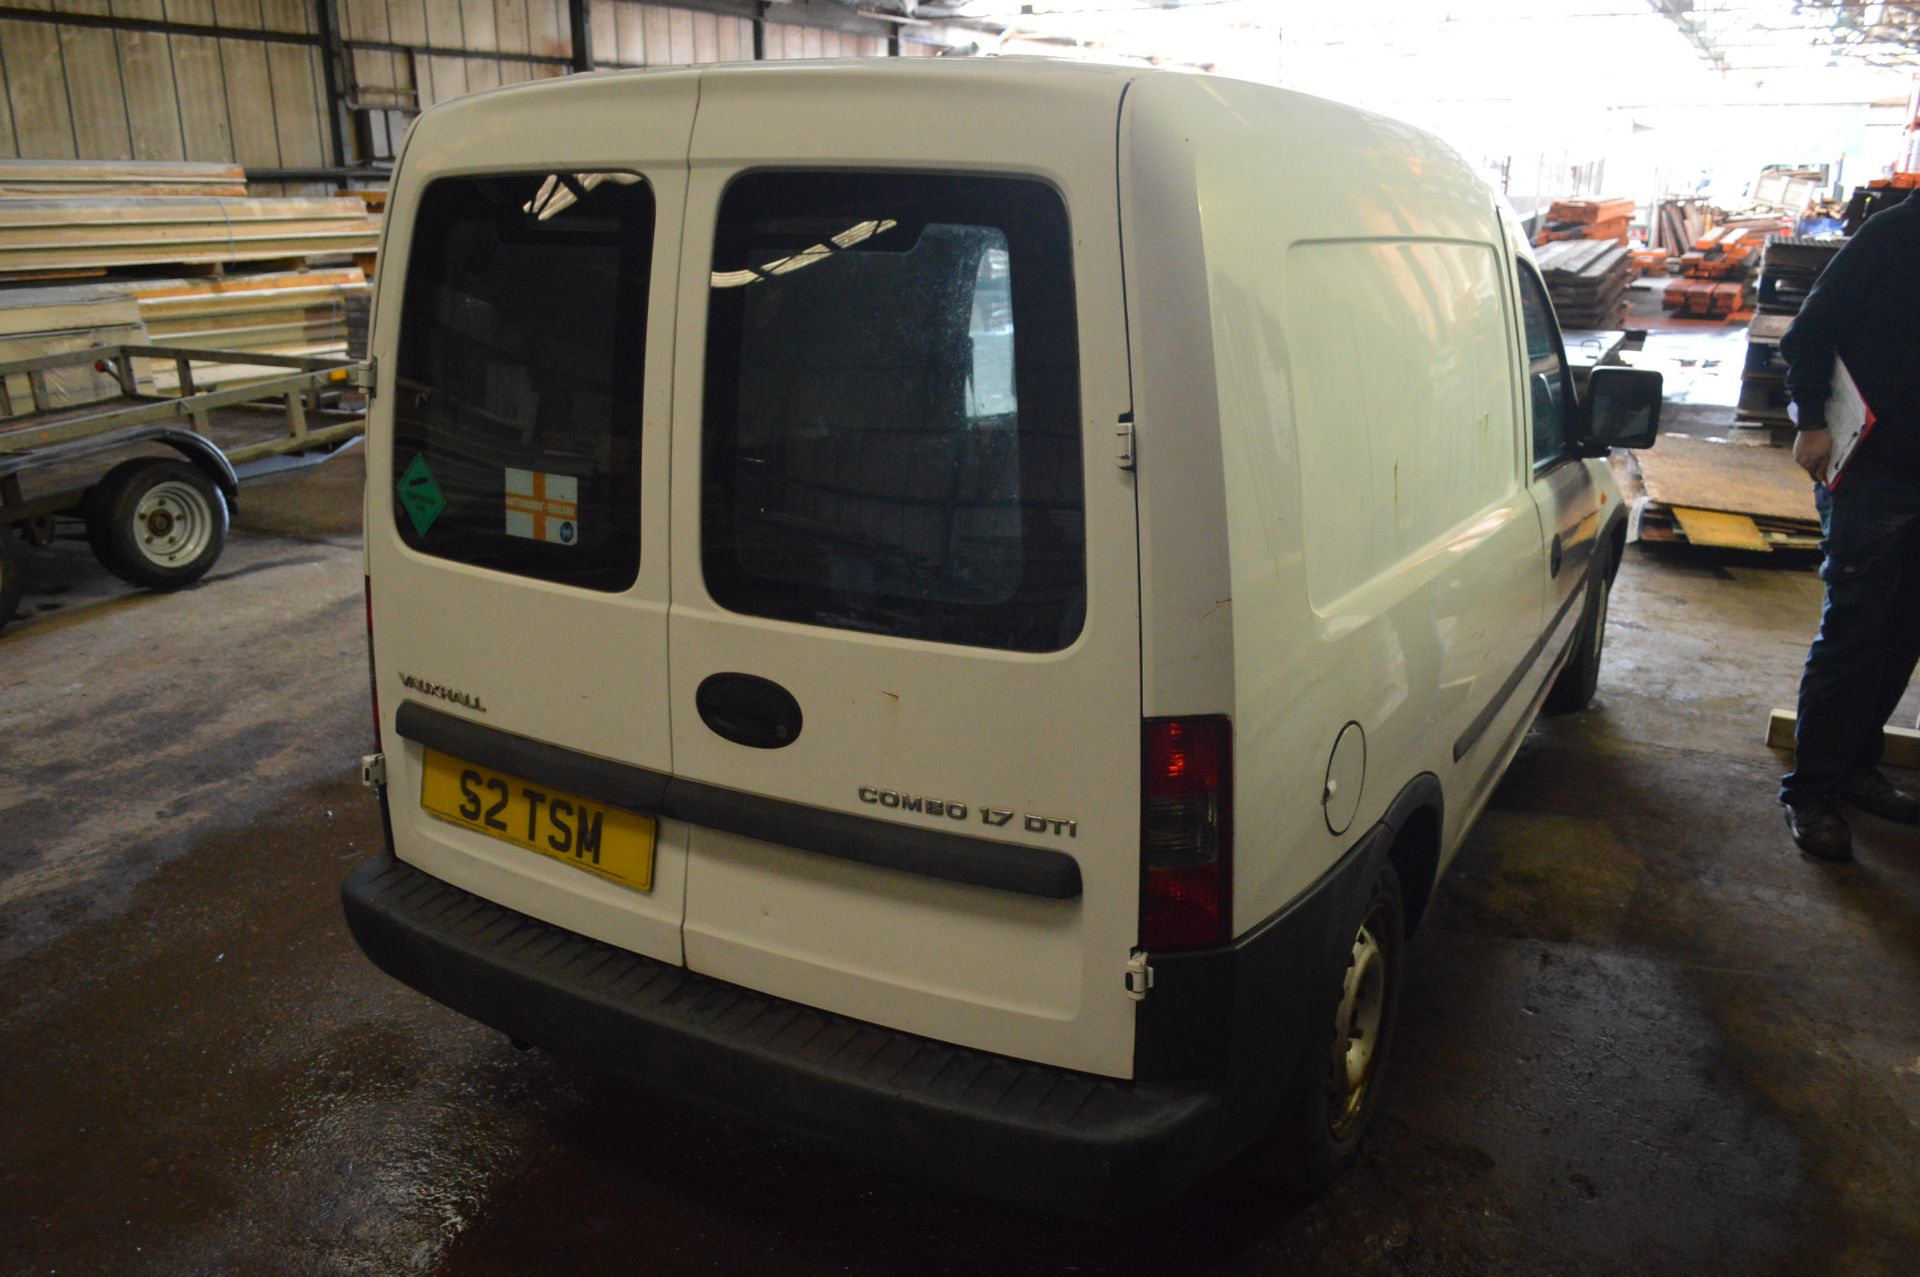 Vauxhall Combi 1.7 DTI Van, registration no. FE58 FFL, date first registered 10/2008, tested to 16/ - Image 5 of 7